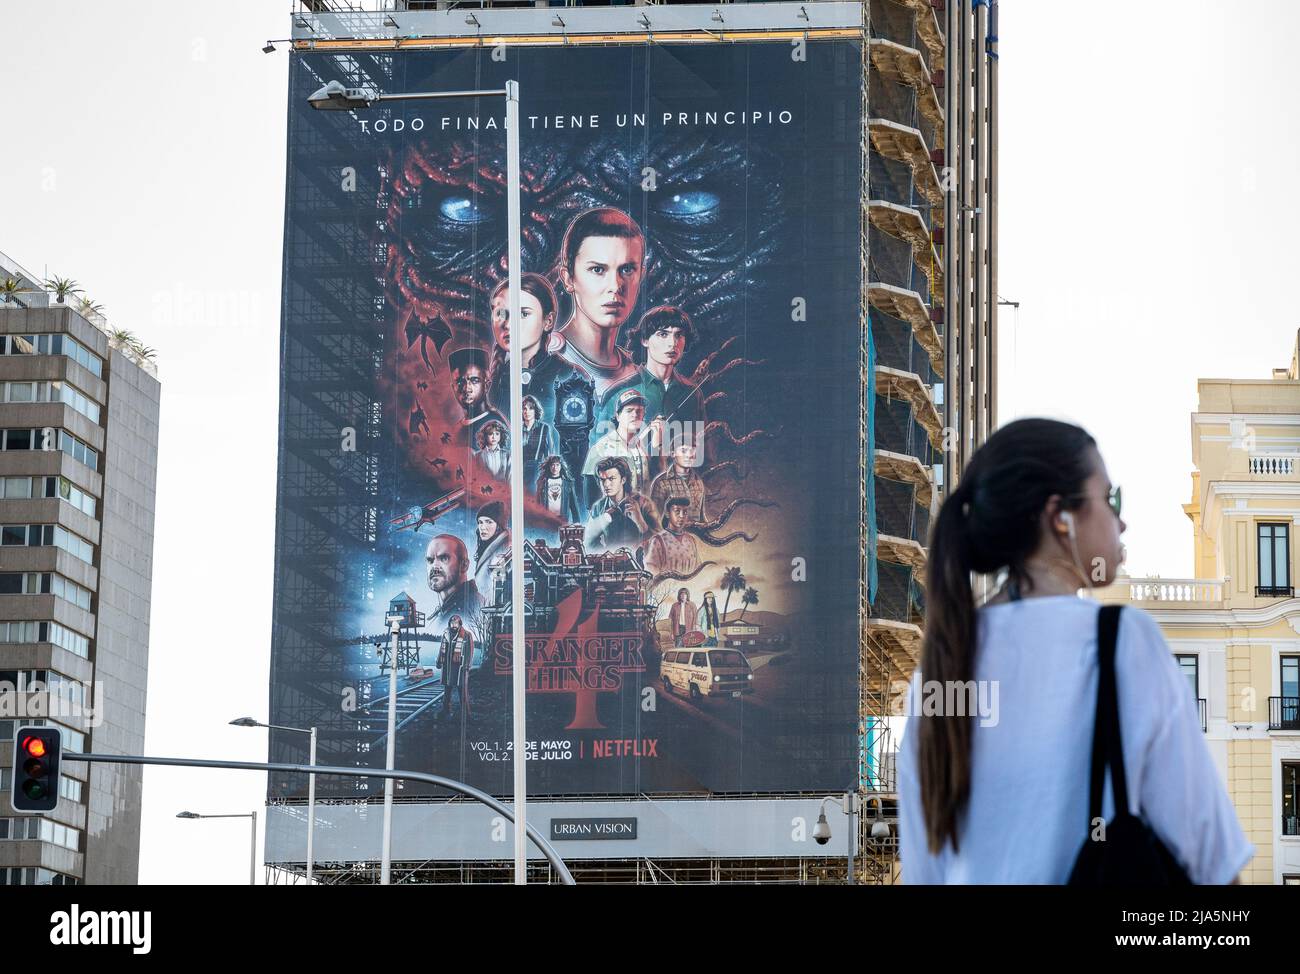 Madrid, Spain. 28th May, 2022. A woman stands opposite of a large street advertisement billboard from the American global on-demand Internet streaming media provider Netflix featuring Stranger Things Season 4 TV show in Spain. (Photo by Xavi Lopez/SOPA Images/Sipa USA) Credit: Sipa USA/Alamy Live News Stock Photo